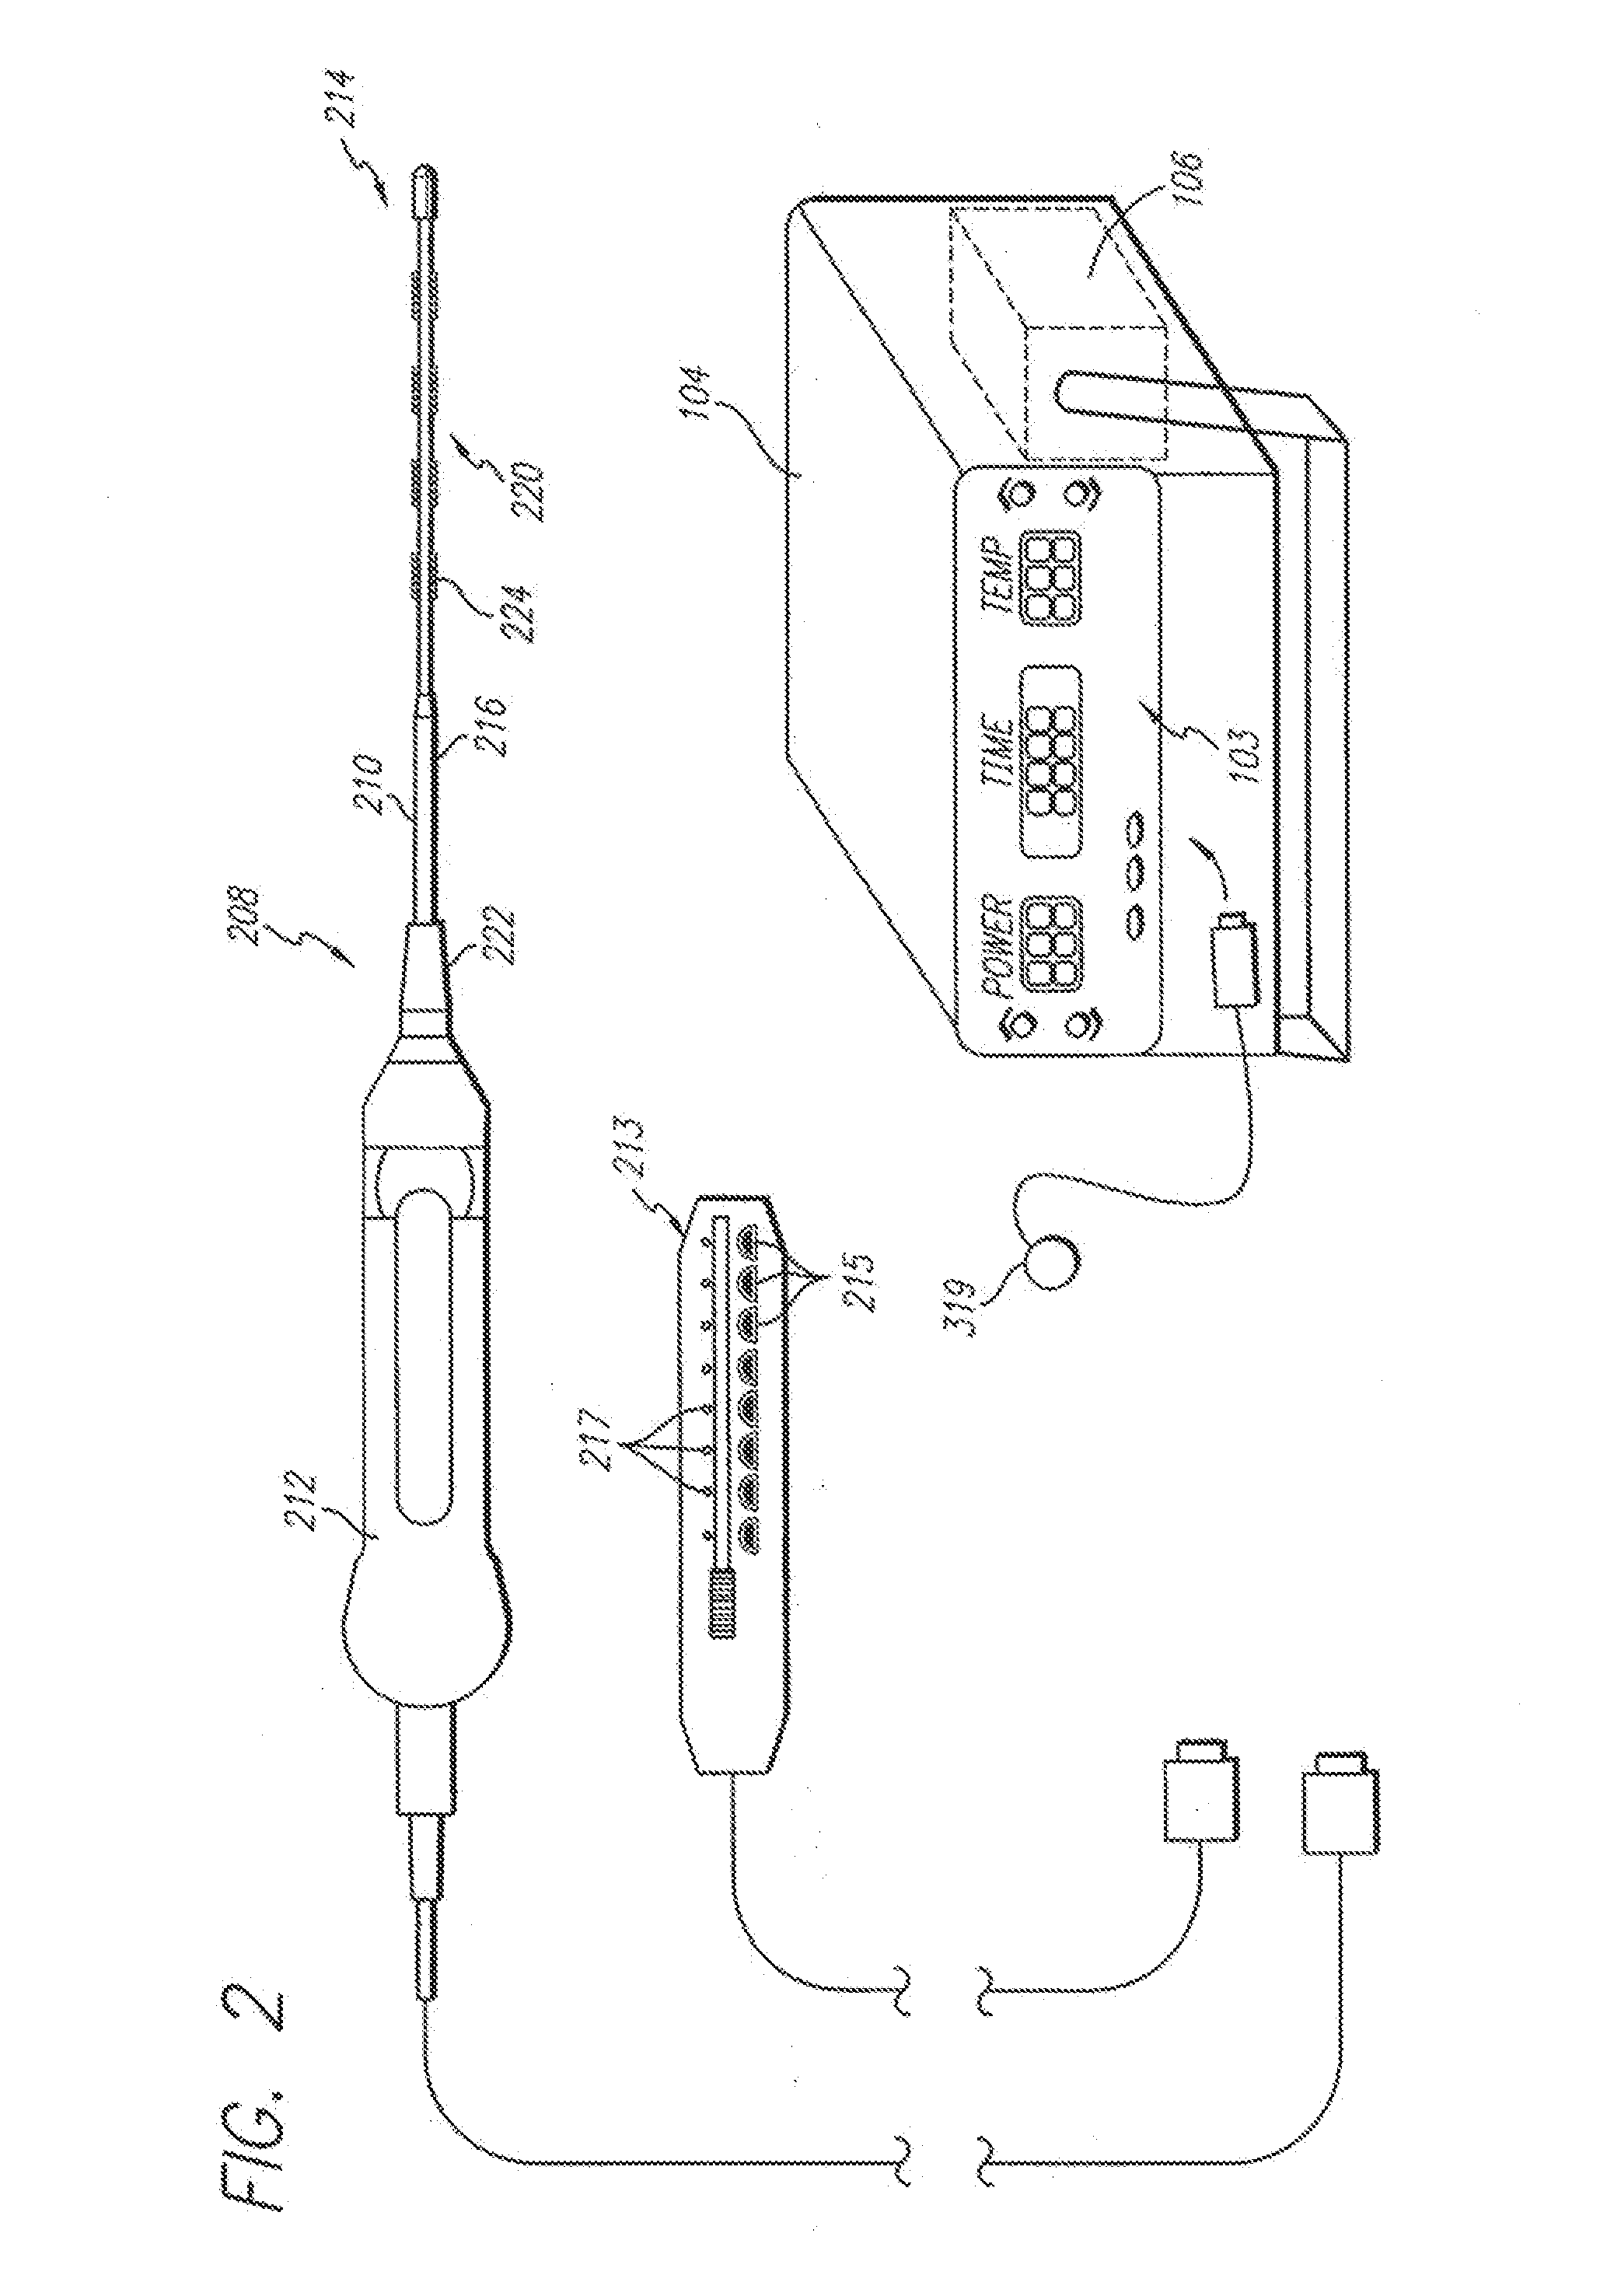 Systems and methods for controlling power in an electrosurgical probe